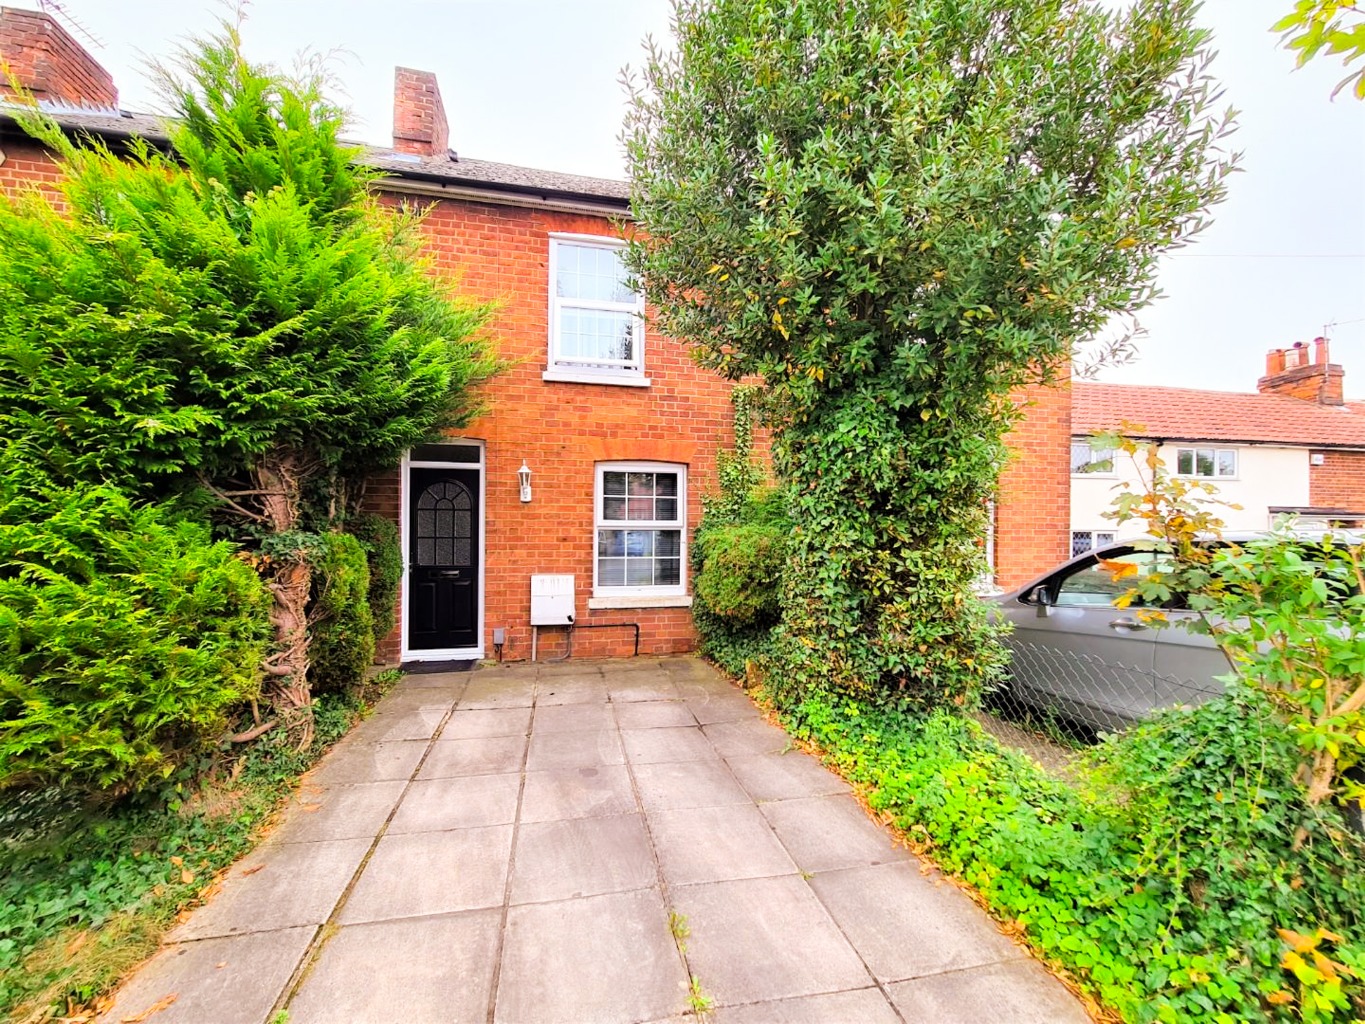 2 bed semi-detached house to rent - Property Image 1